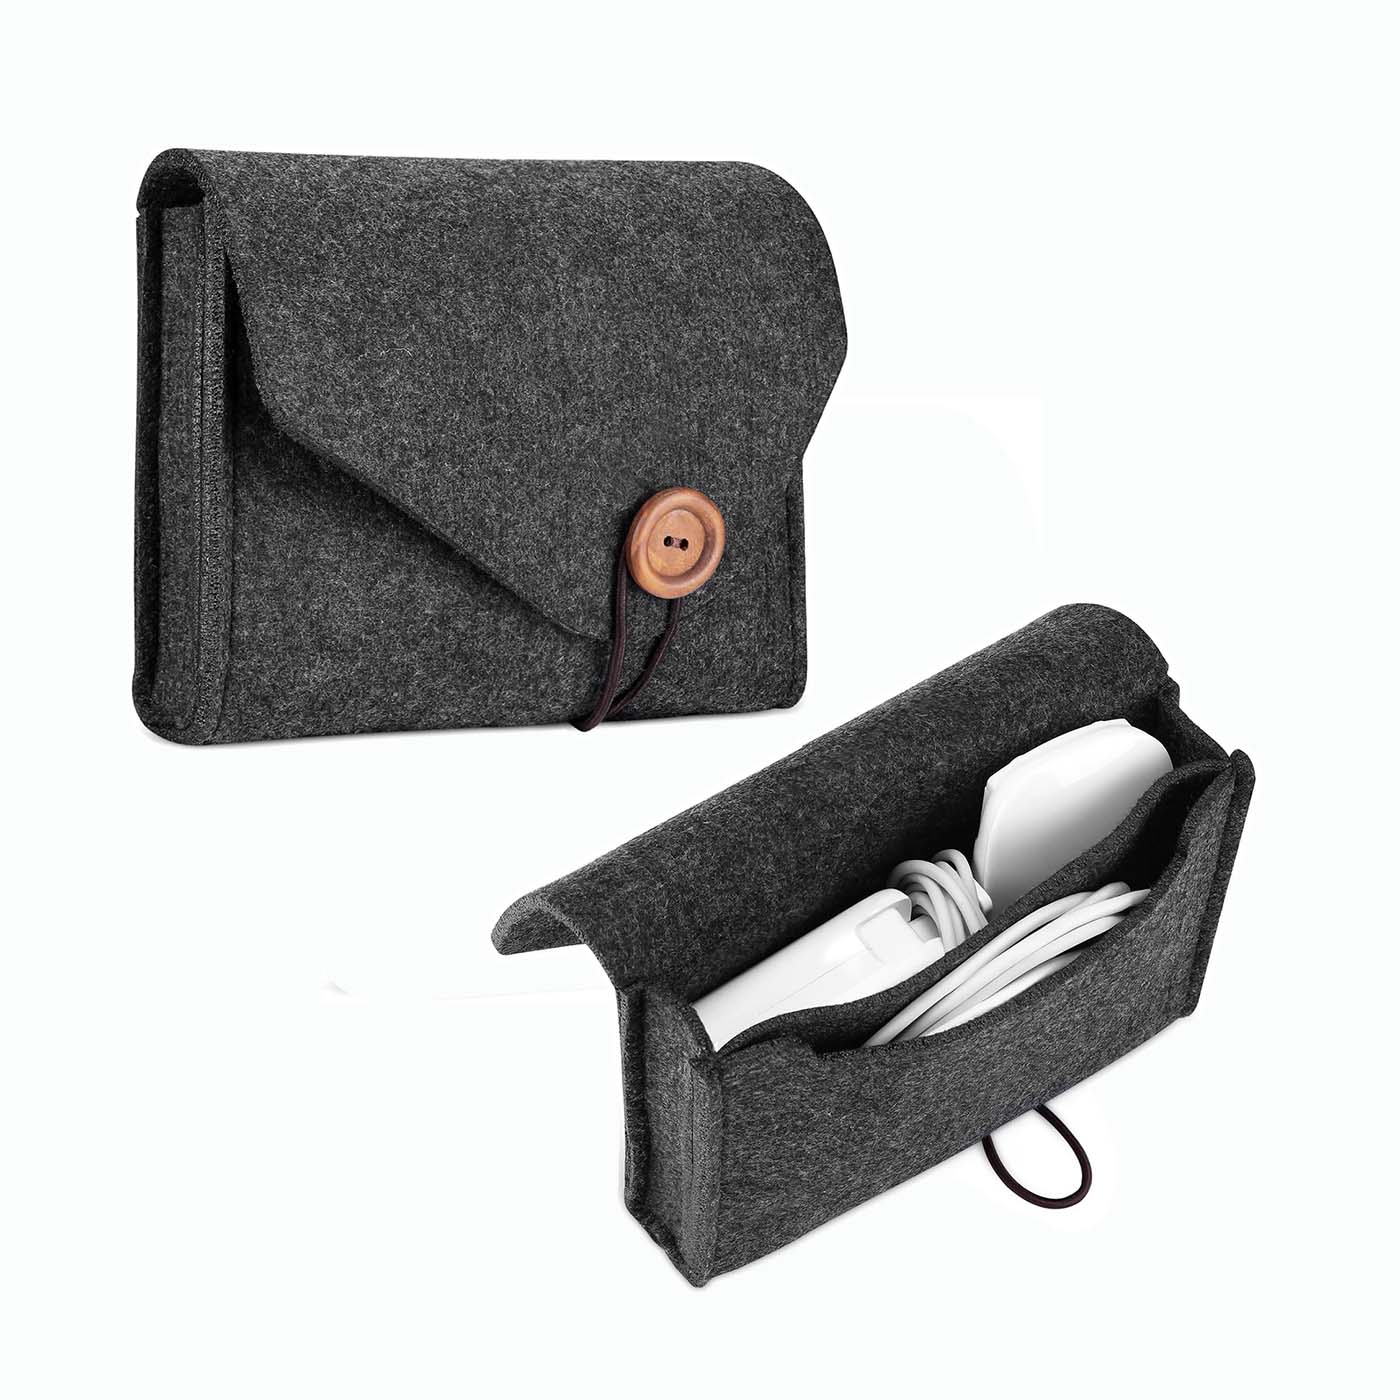 Felt MacBook Power Adapter Case Storage Bag (I have 2 - one for my power adaptor and cables & another for my charging station)